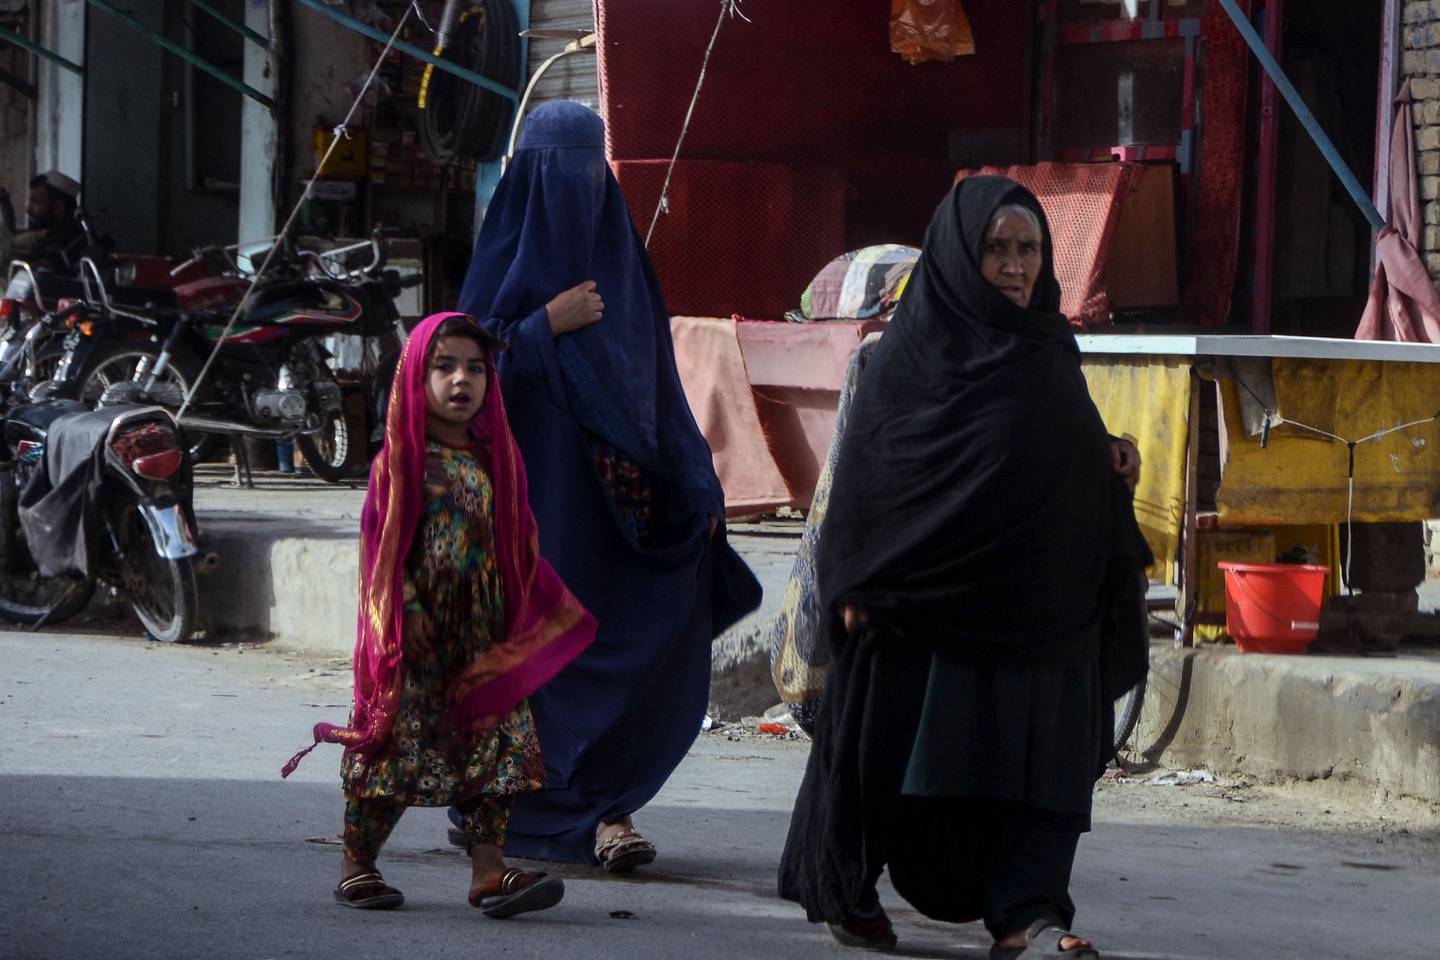 The Afghan Taliban in May ordered women to cover fully in public, ideally with the traditional burqa. AFP